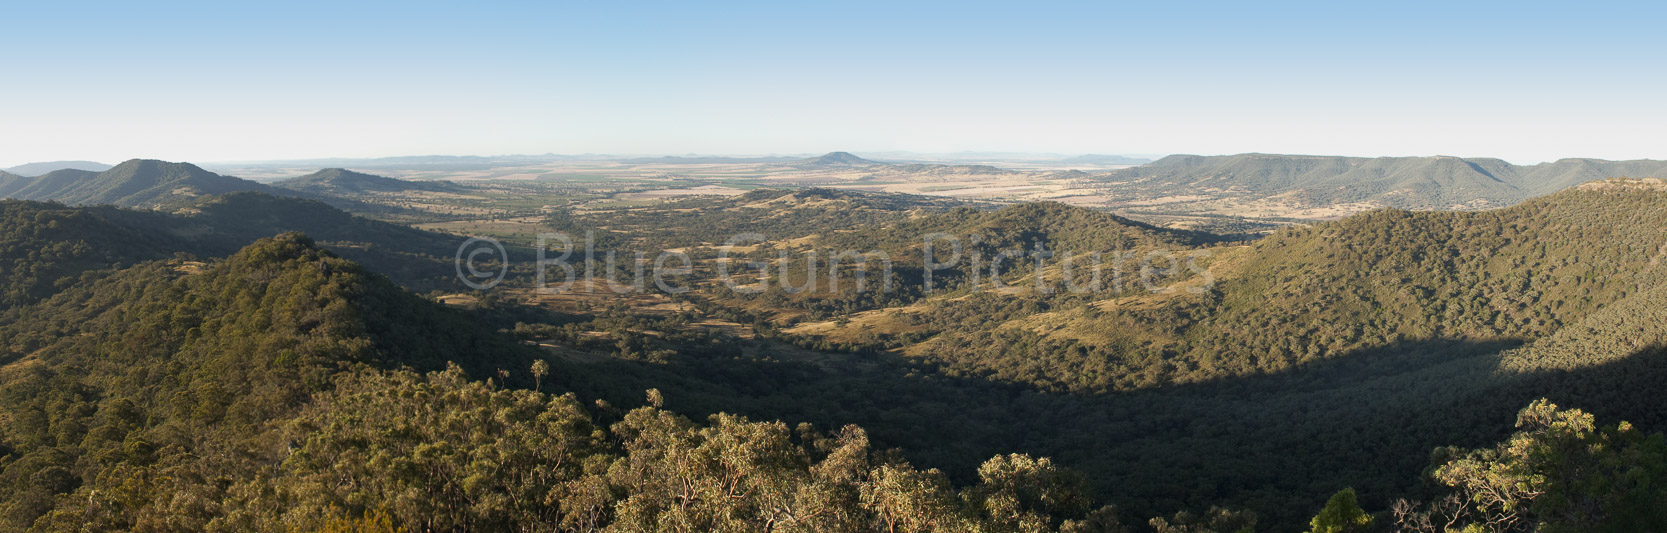 View from the Pinnacle Lookout